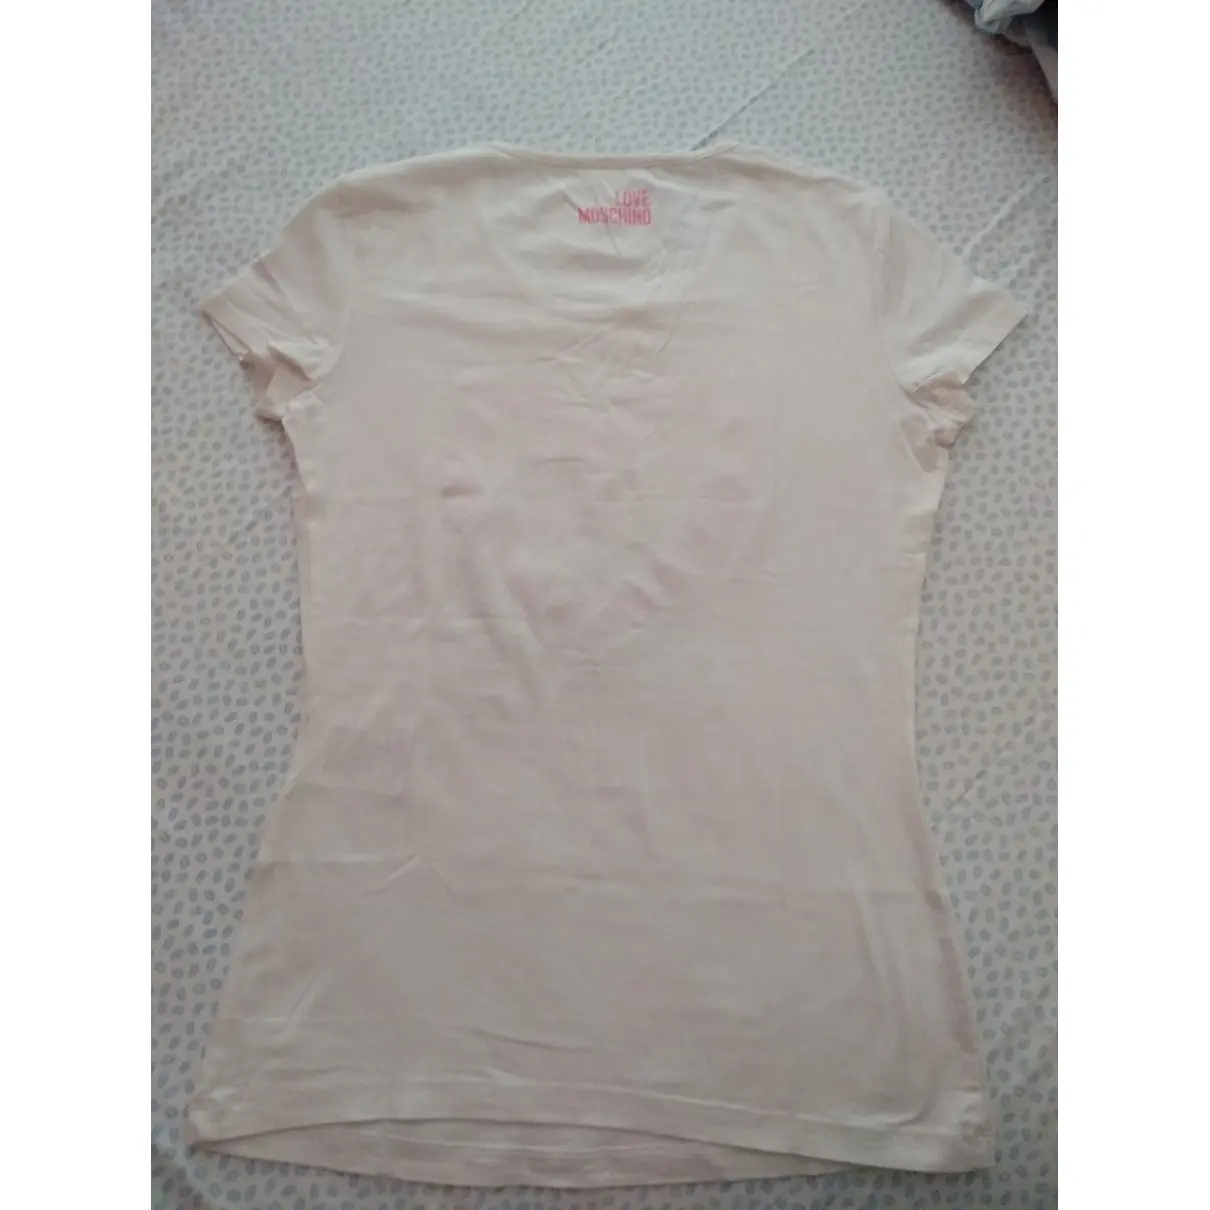 Buy Moschino Love White Cotton Top online